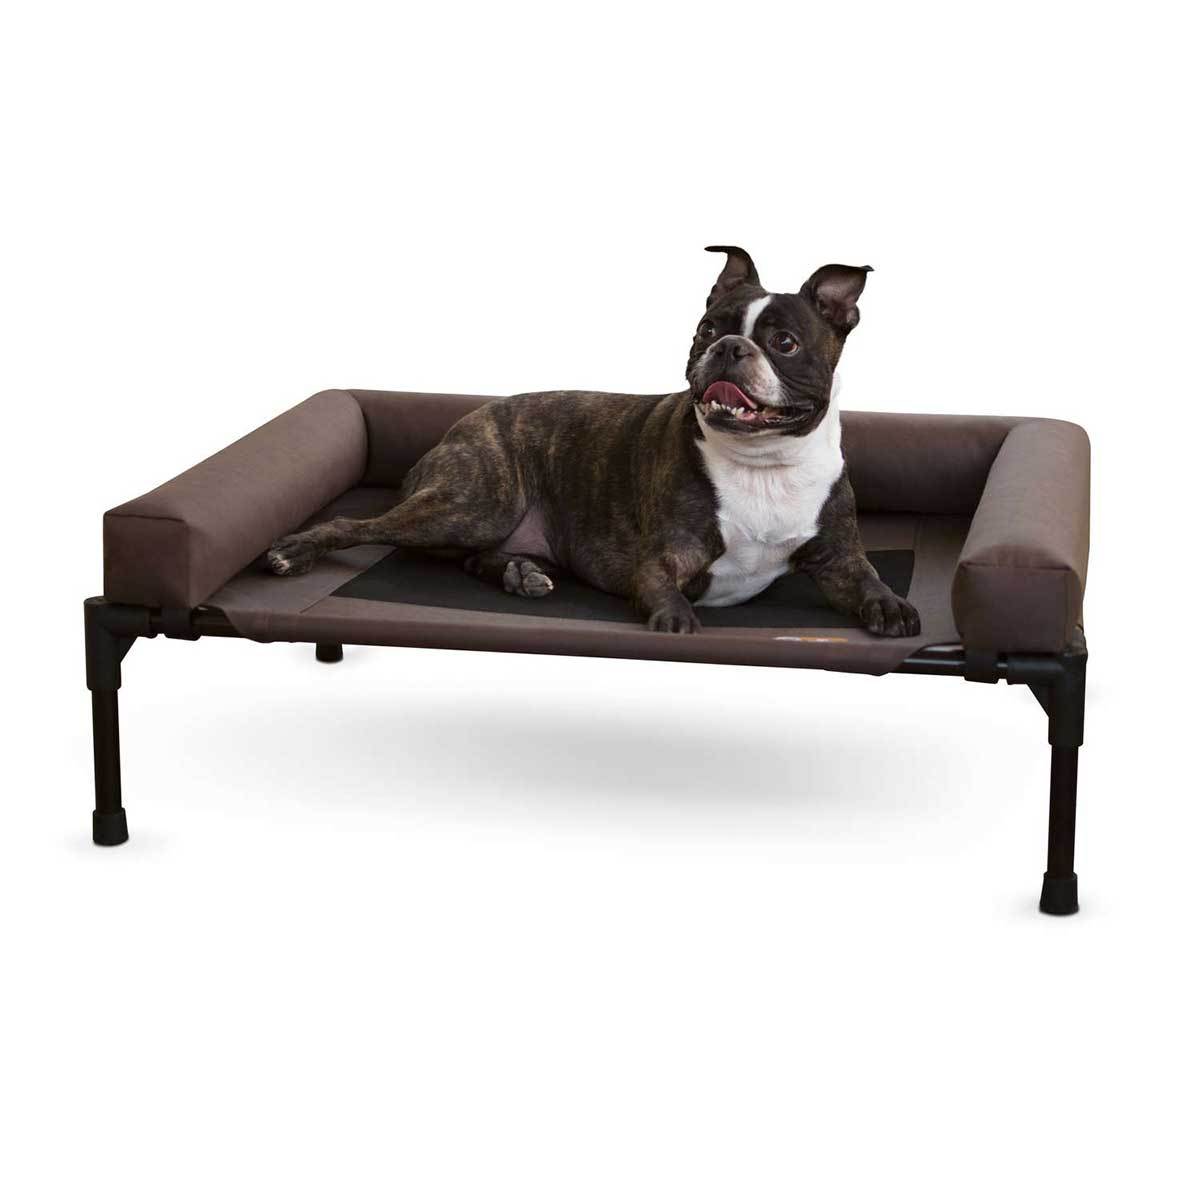 Chocolate Brown Dog Cot with Bolster - Medium | Pawlicious & Company